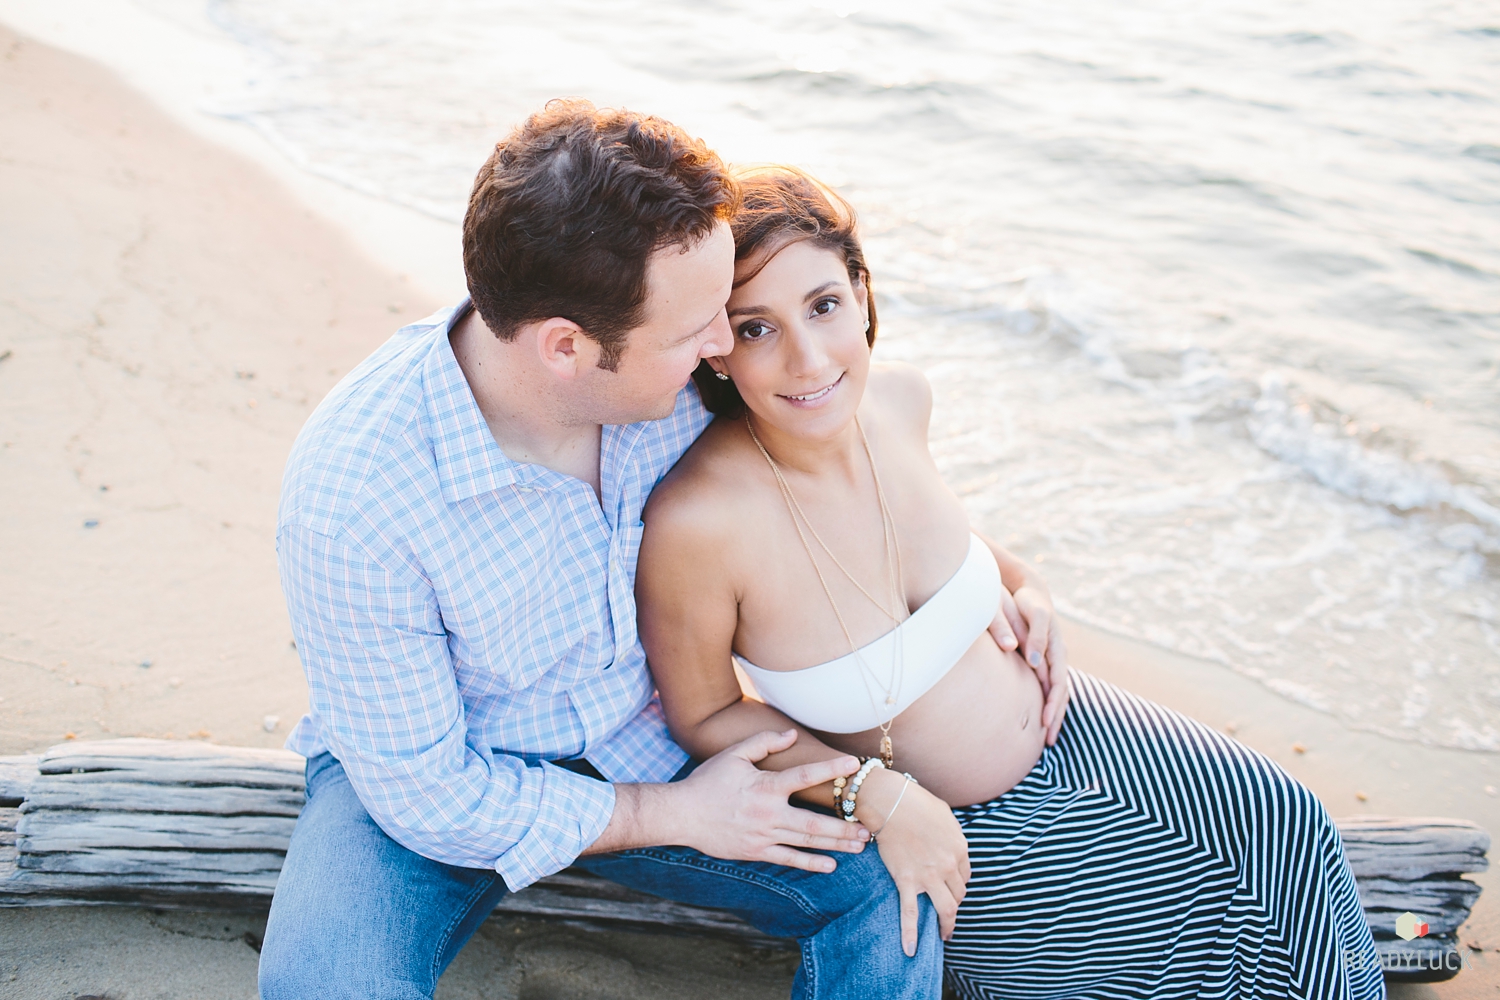  Maternity Portrait  Photo By:&nbsp; Lindsay Hite @ Ready Luck  